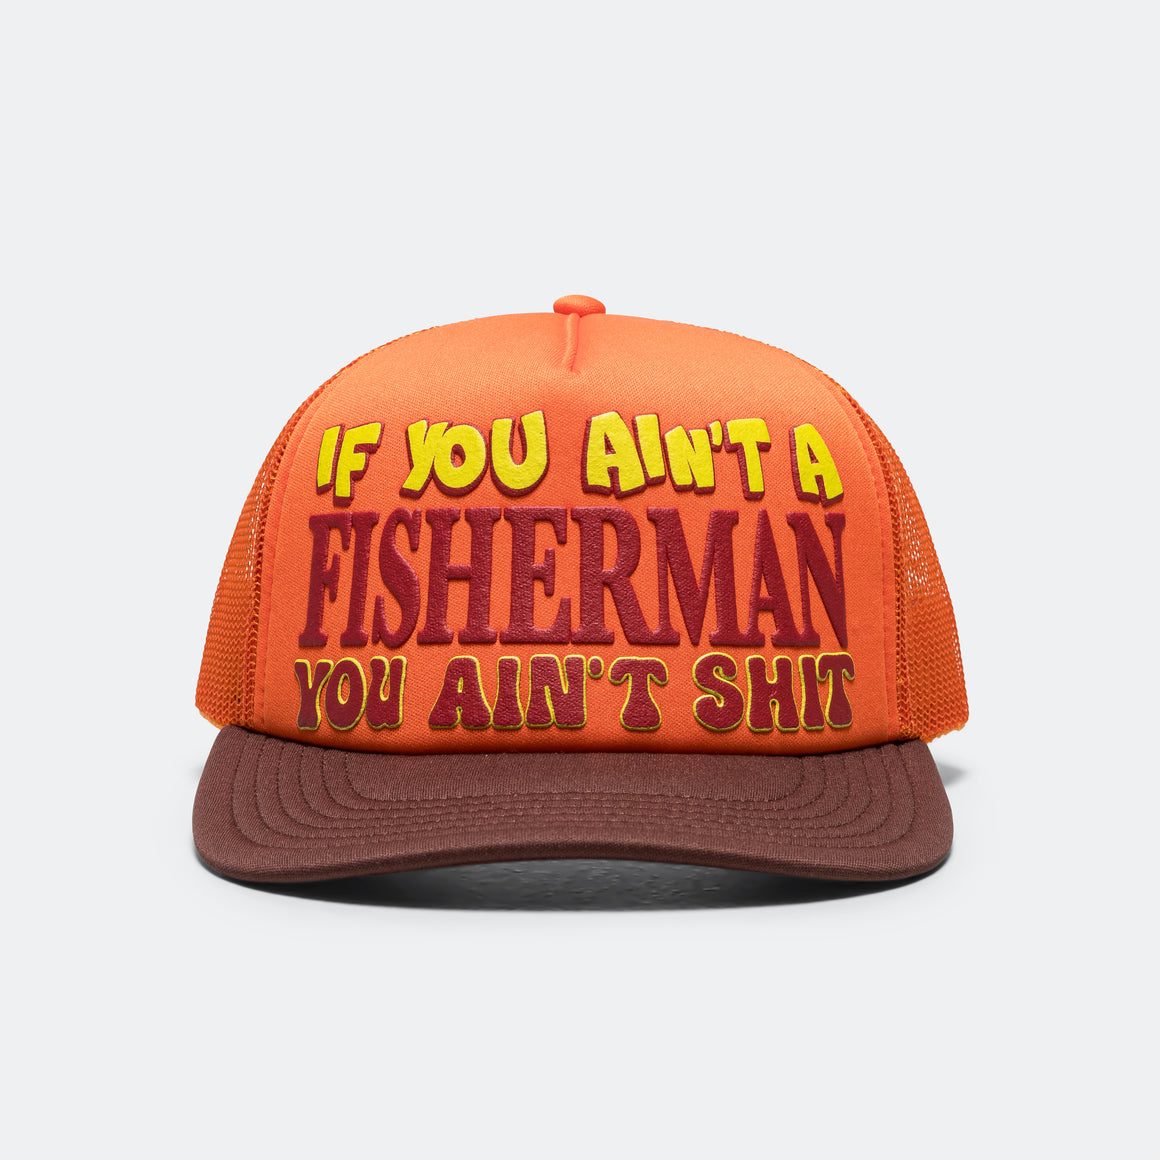 Western Hydrodynamic Research - Fishing Hat - Orange/Brown - UP THERE